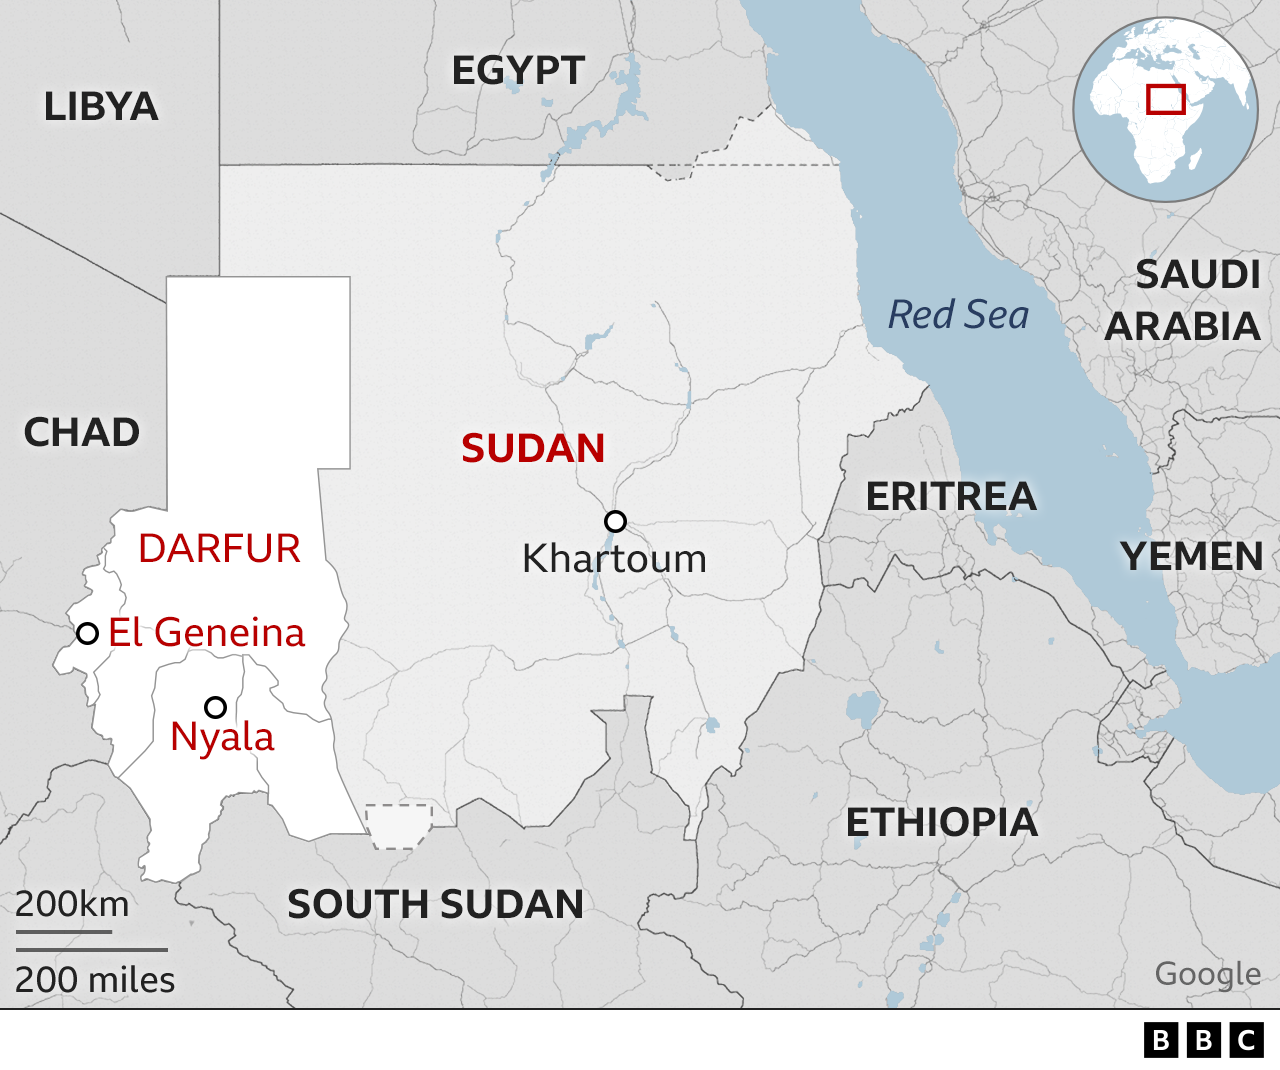 Map showing Darfur and the rest of Sudan and the cities of El Geneina, Nyala and Khartoum